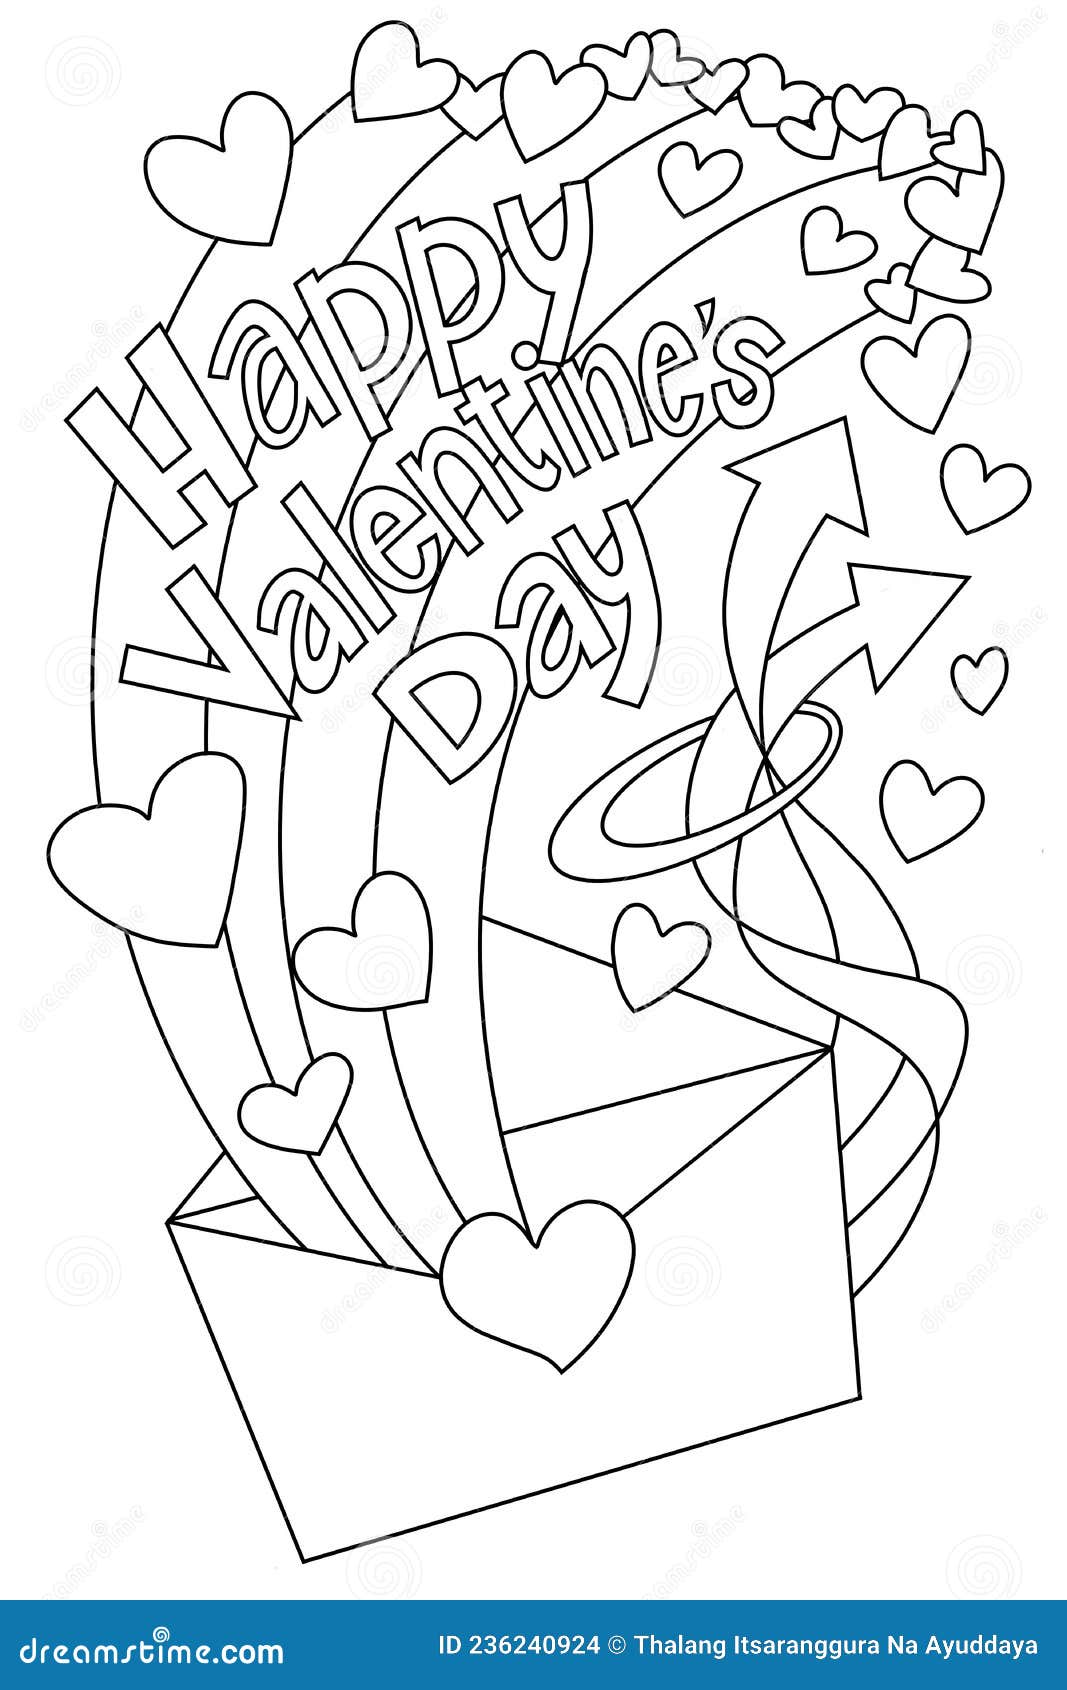 Illustration of doodle cute envelope happy valentines day coloring book background hand draw stock illustration